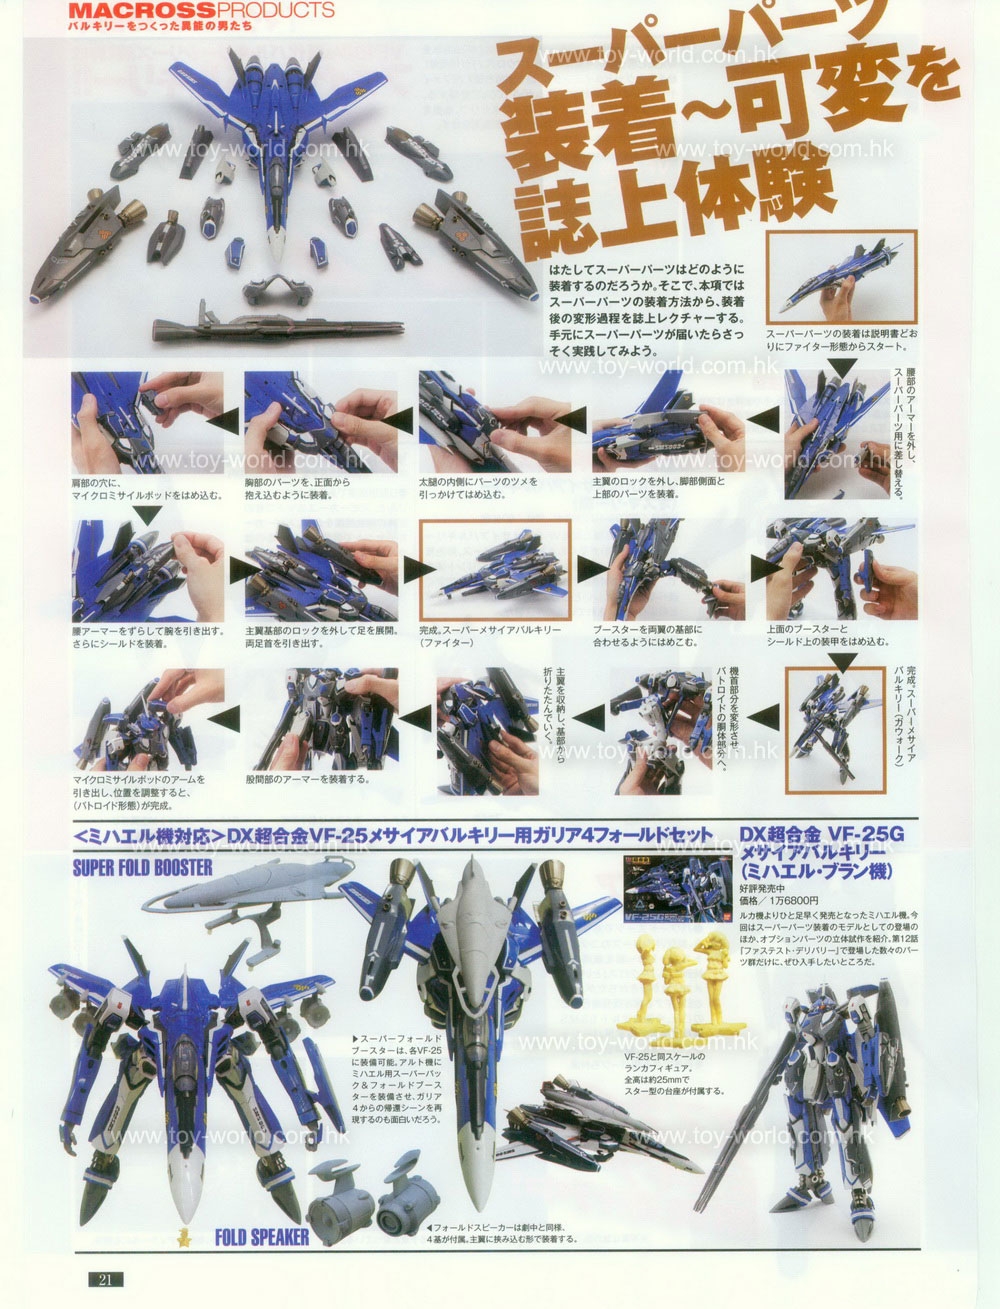 Figure OH No.134 - Special Feature: MACROSS Products 19